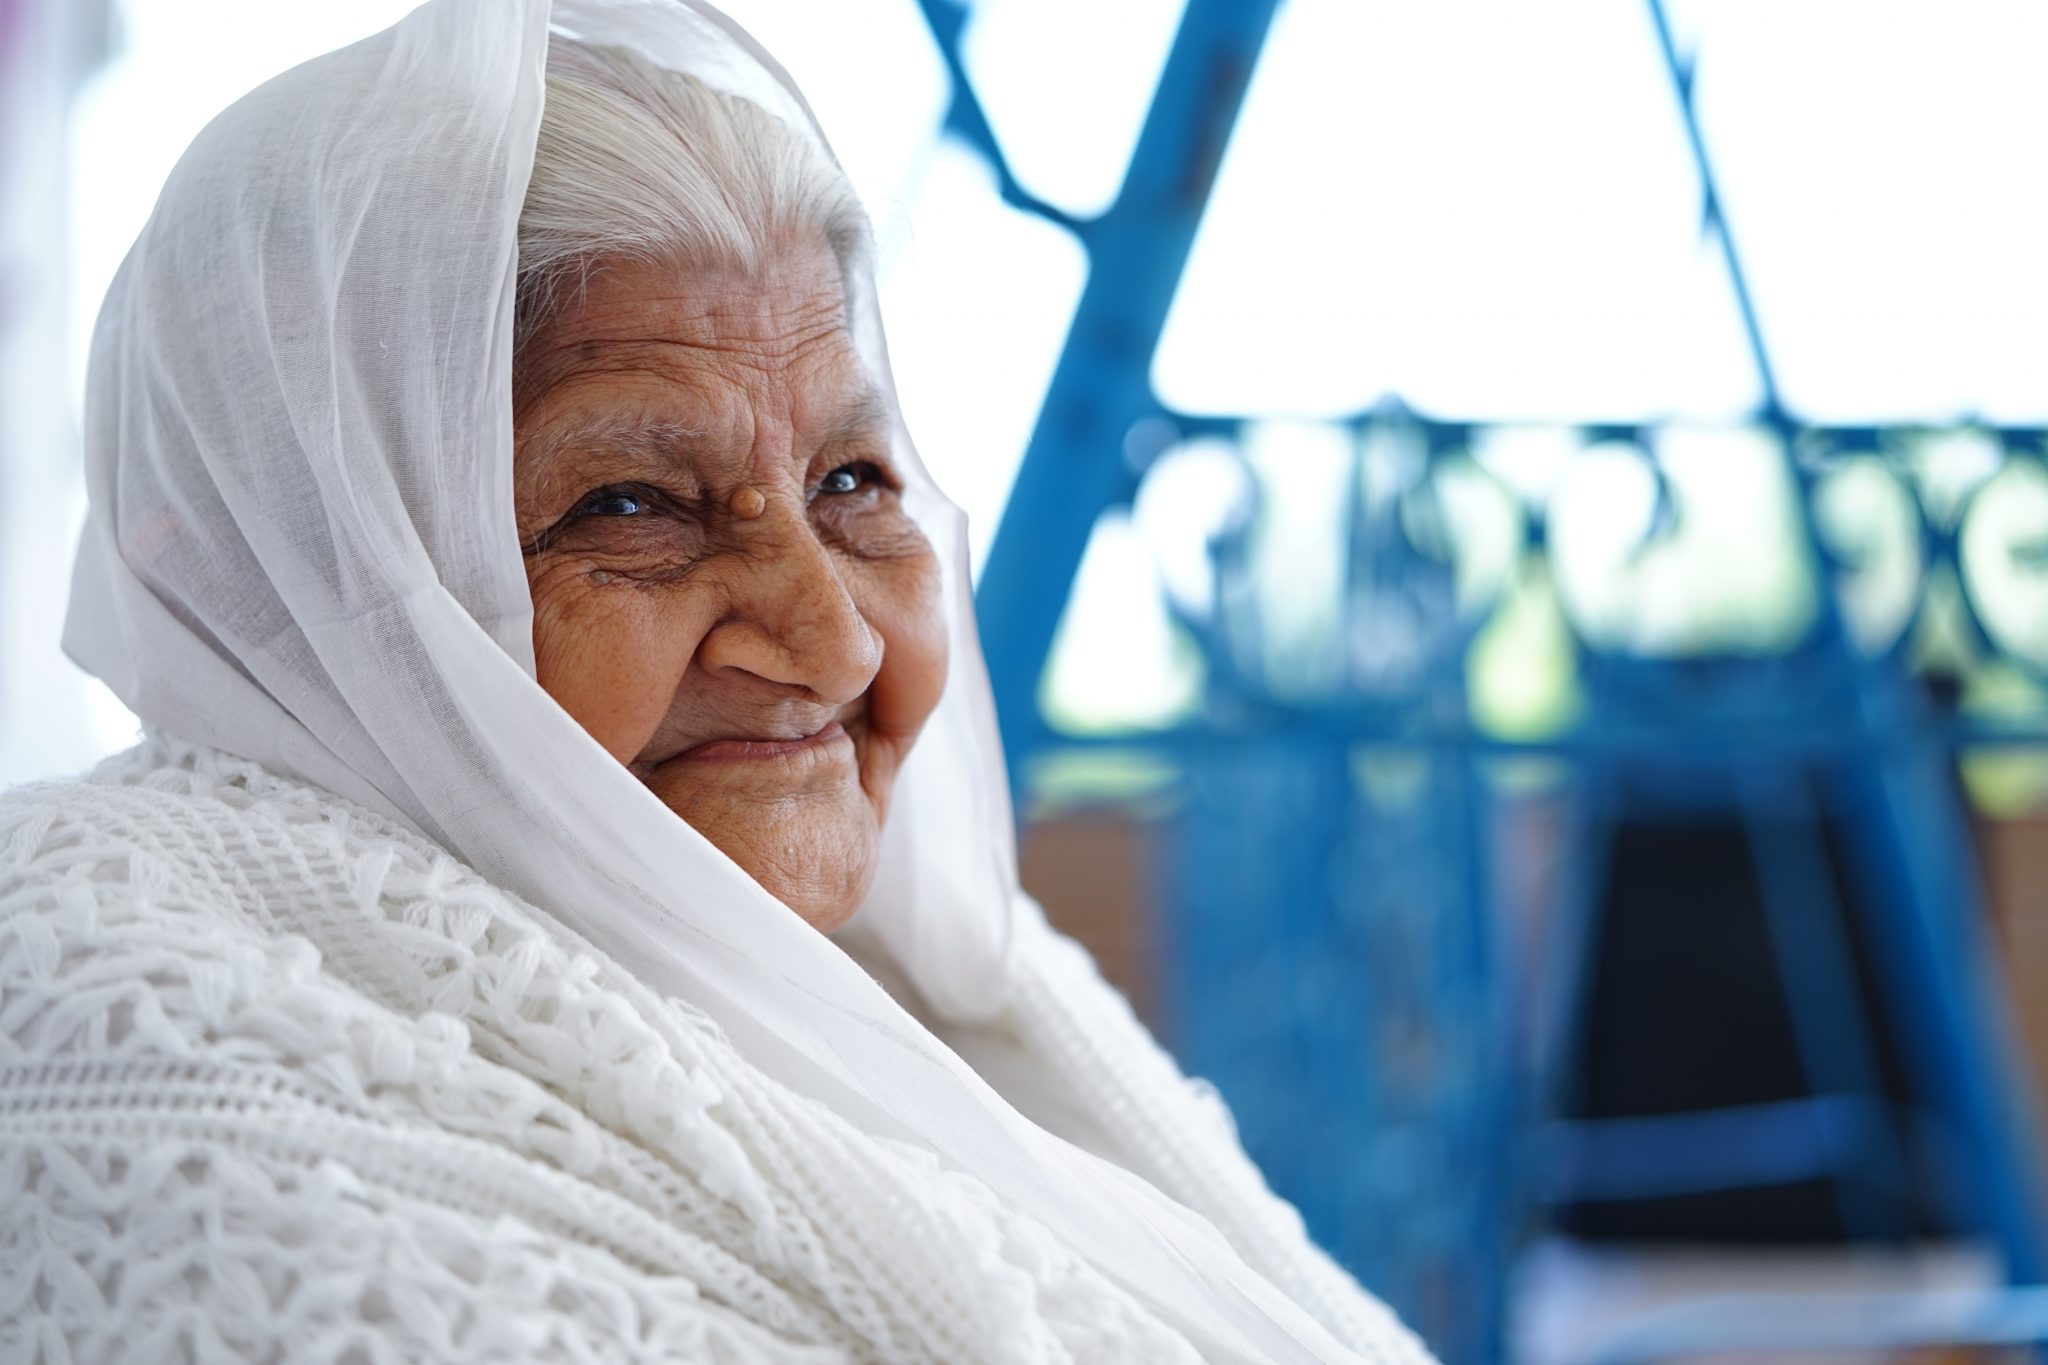 close-up photo of woman sitting while smiling